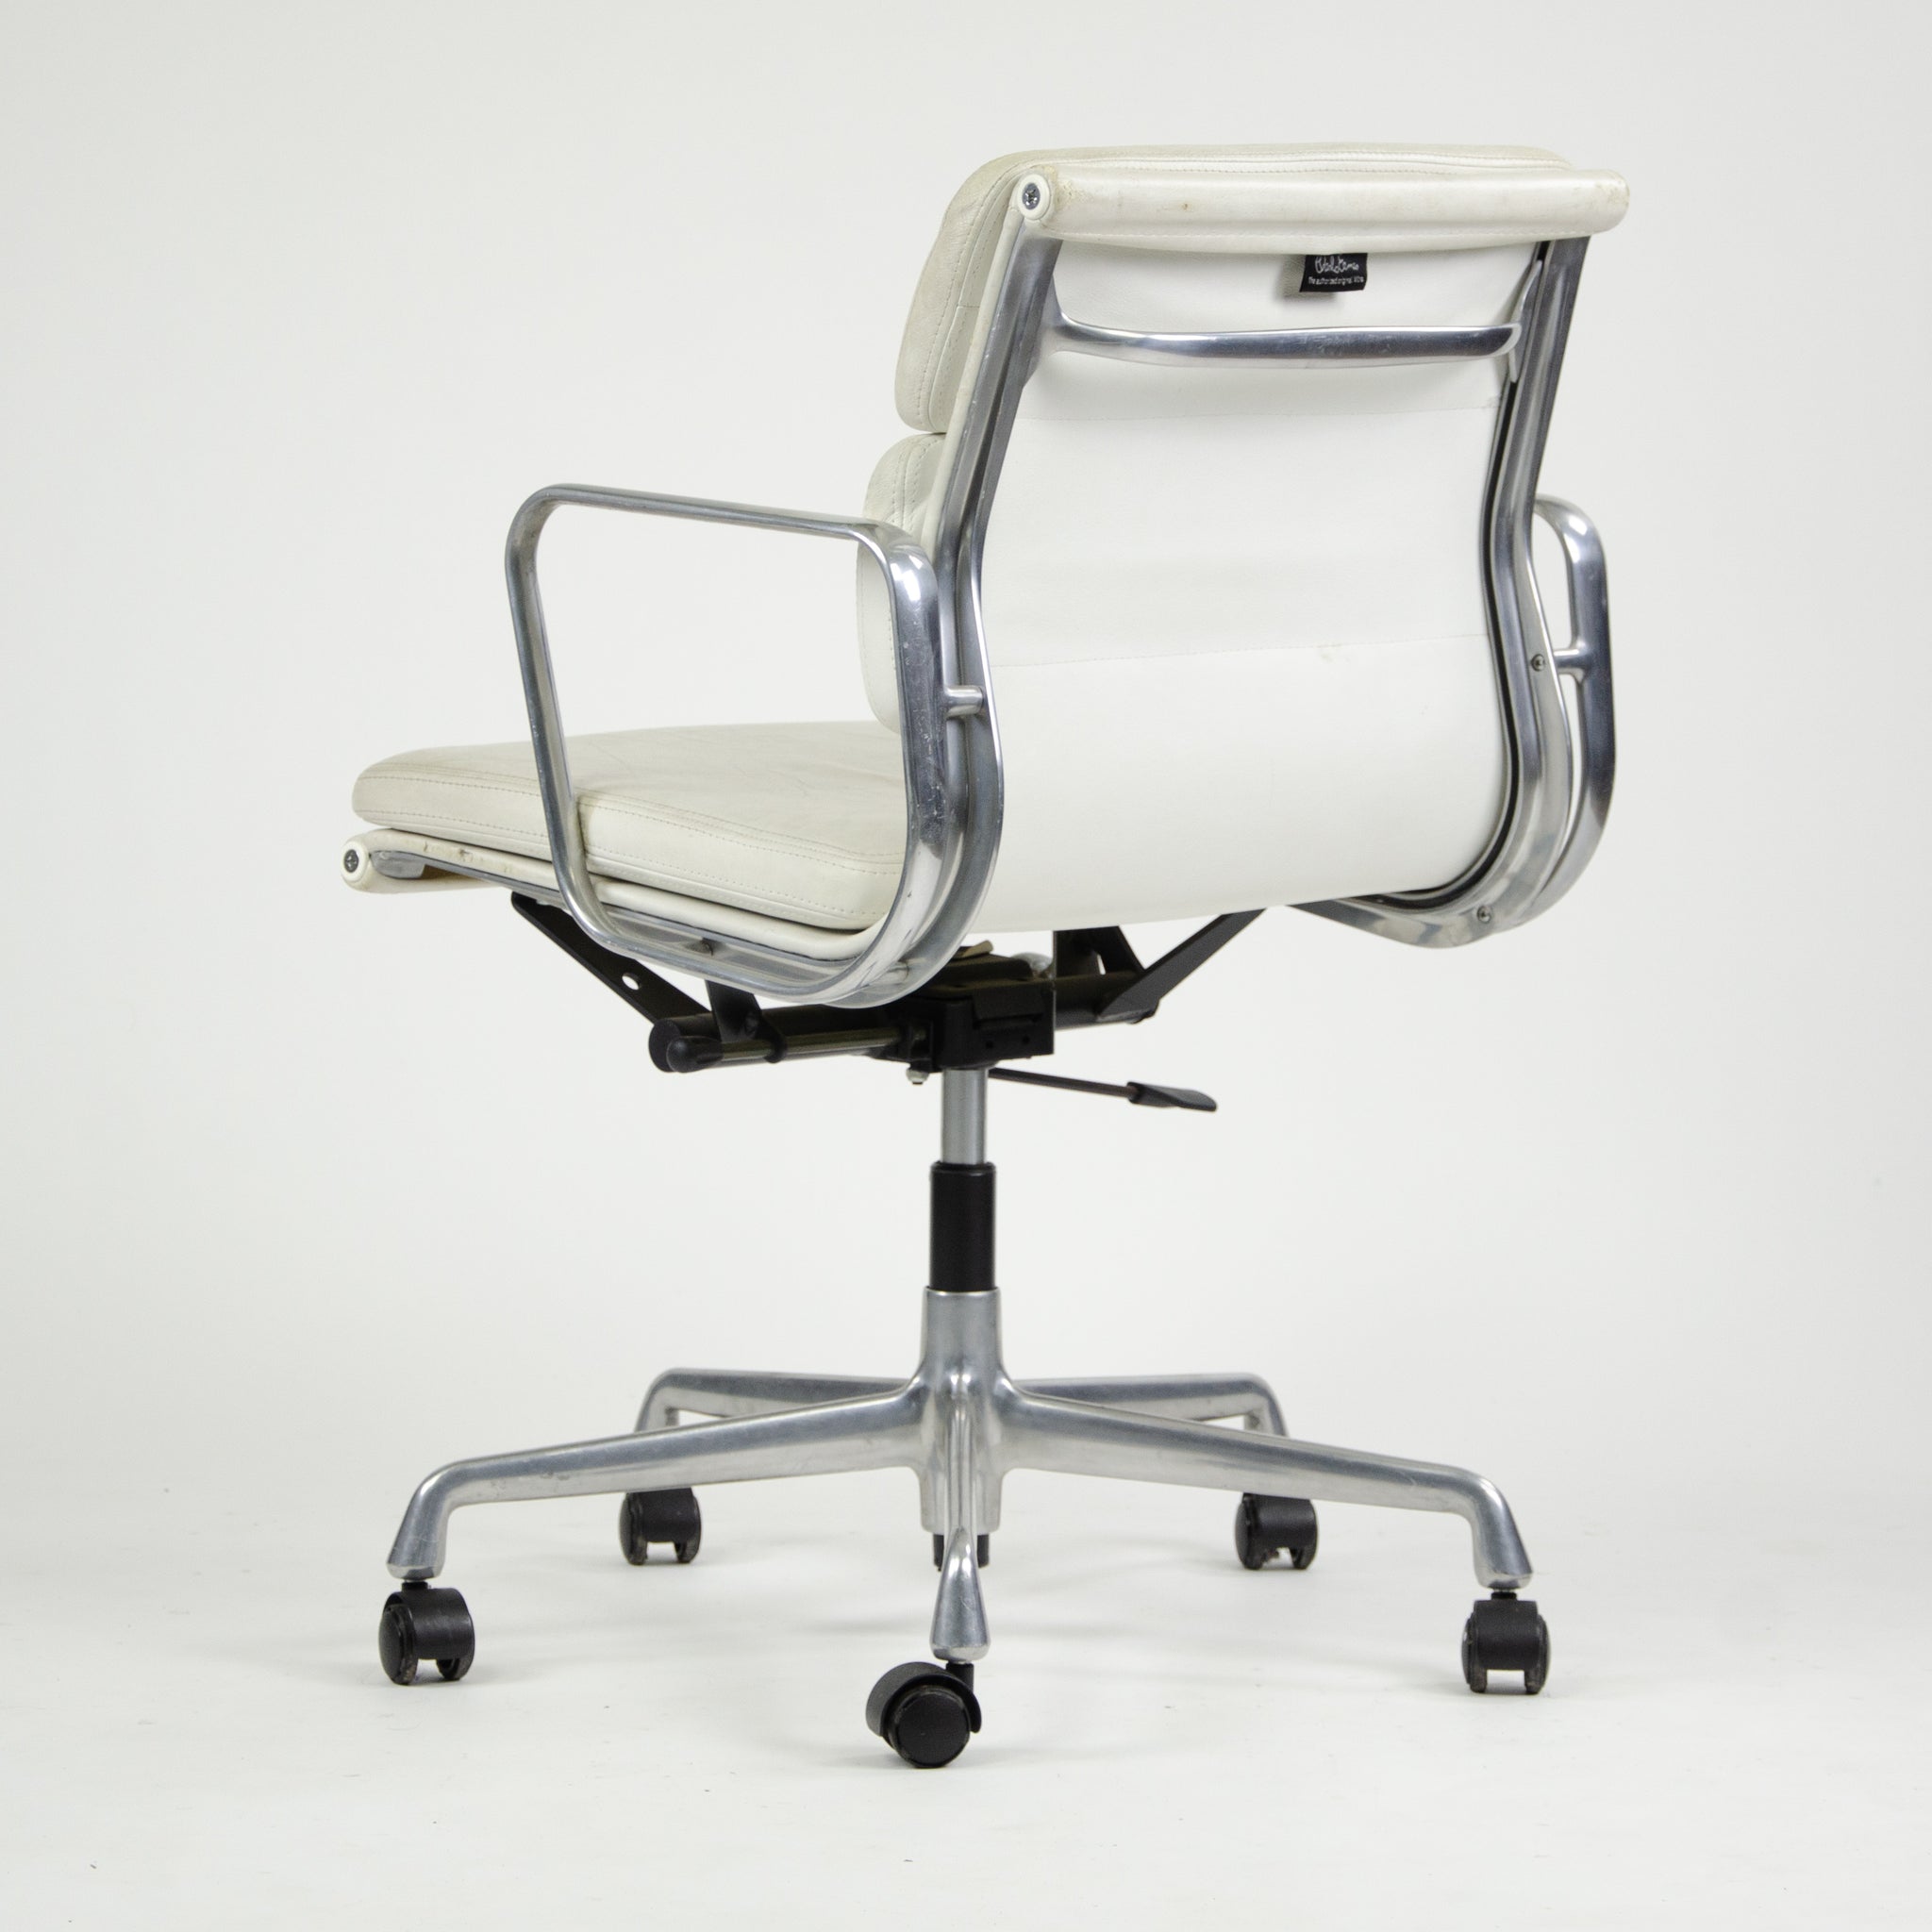 SOLD Pair Eames Herman Miller Vitra Soft Pad Aluminum Chairs White Leather